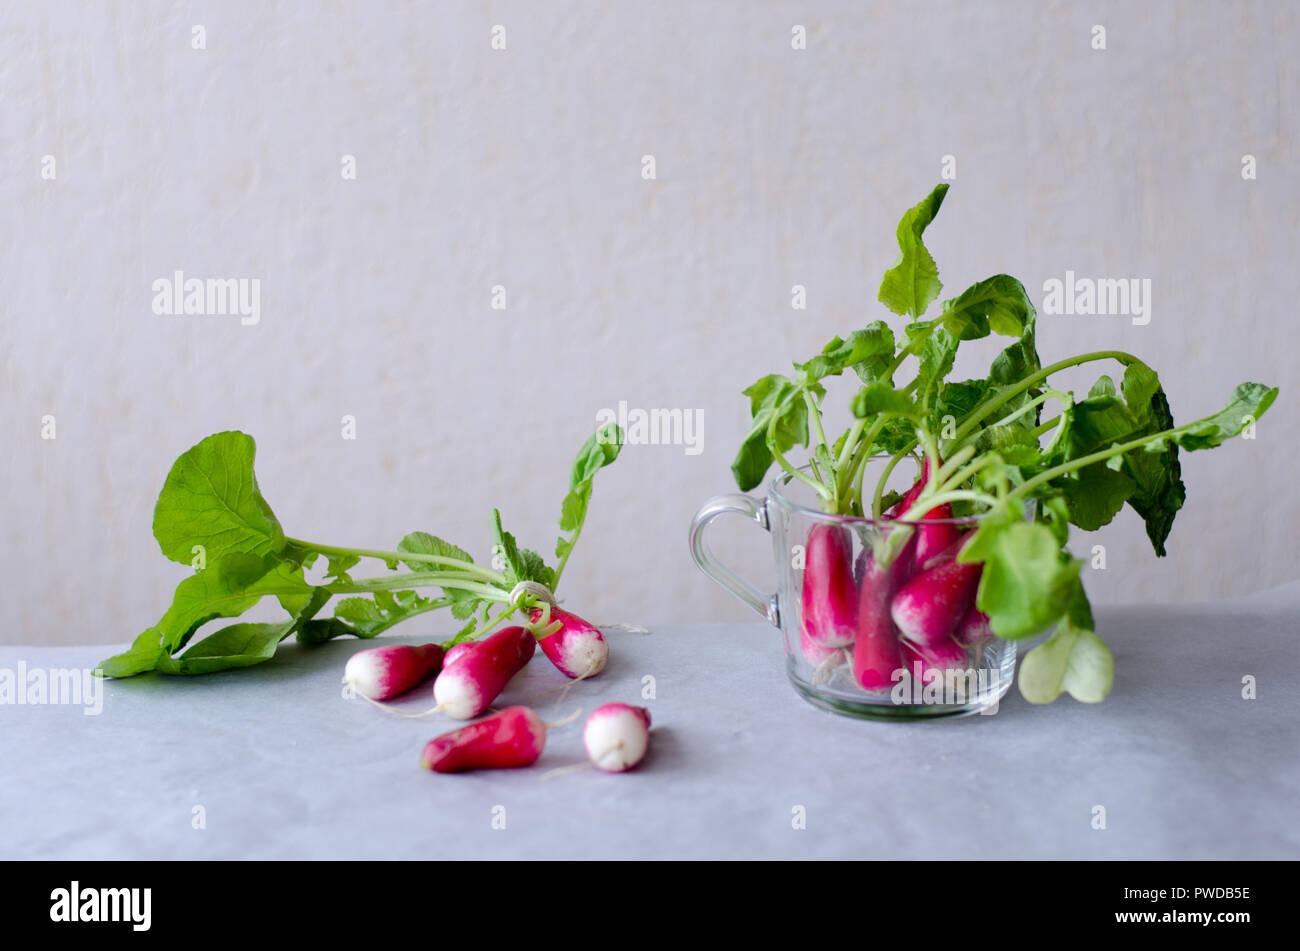 A group of radishes with white tips on a table Stock Photo